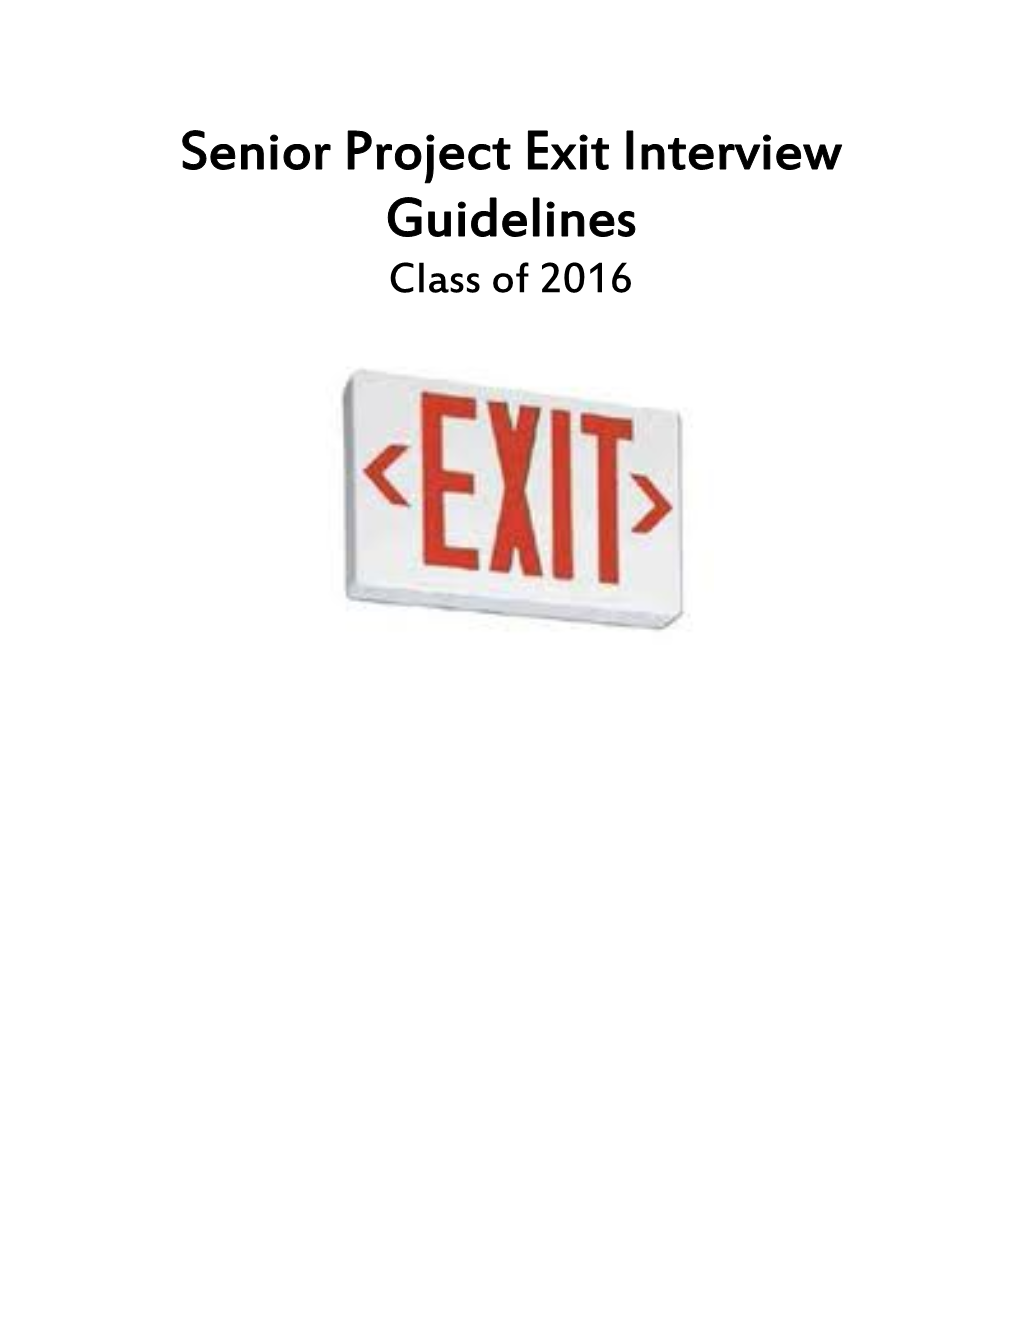 Senior Project Exit Interview Guidelines